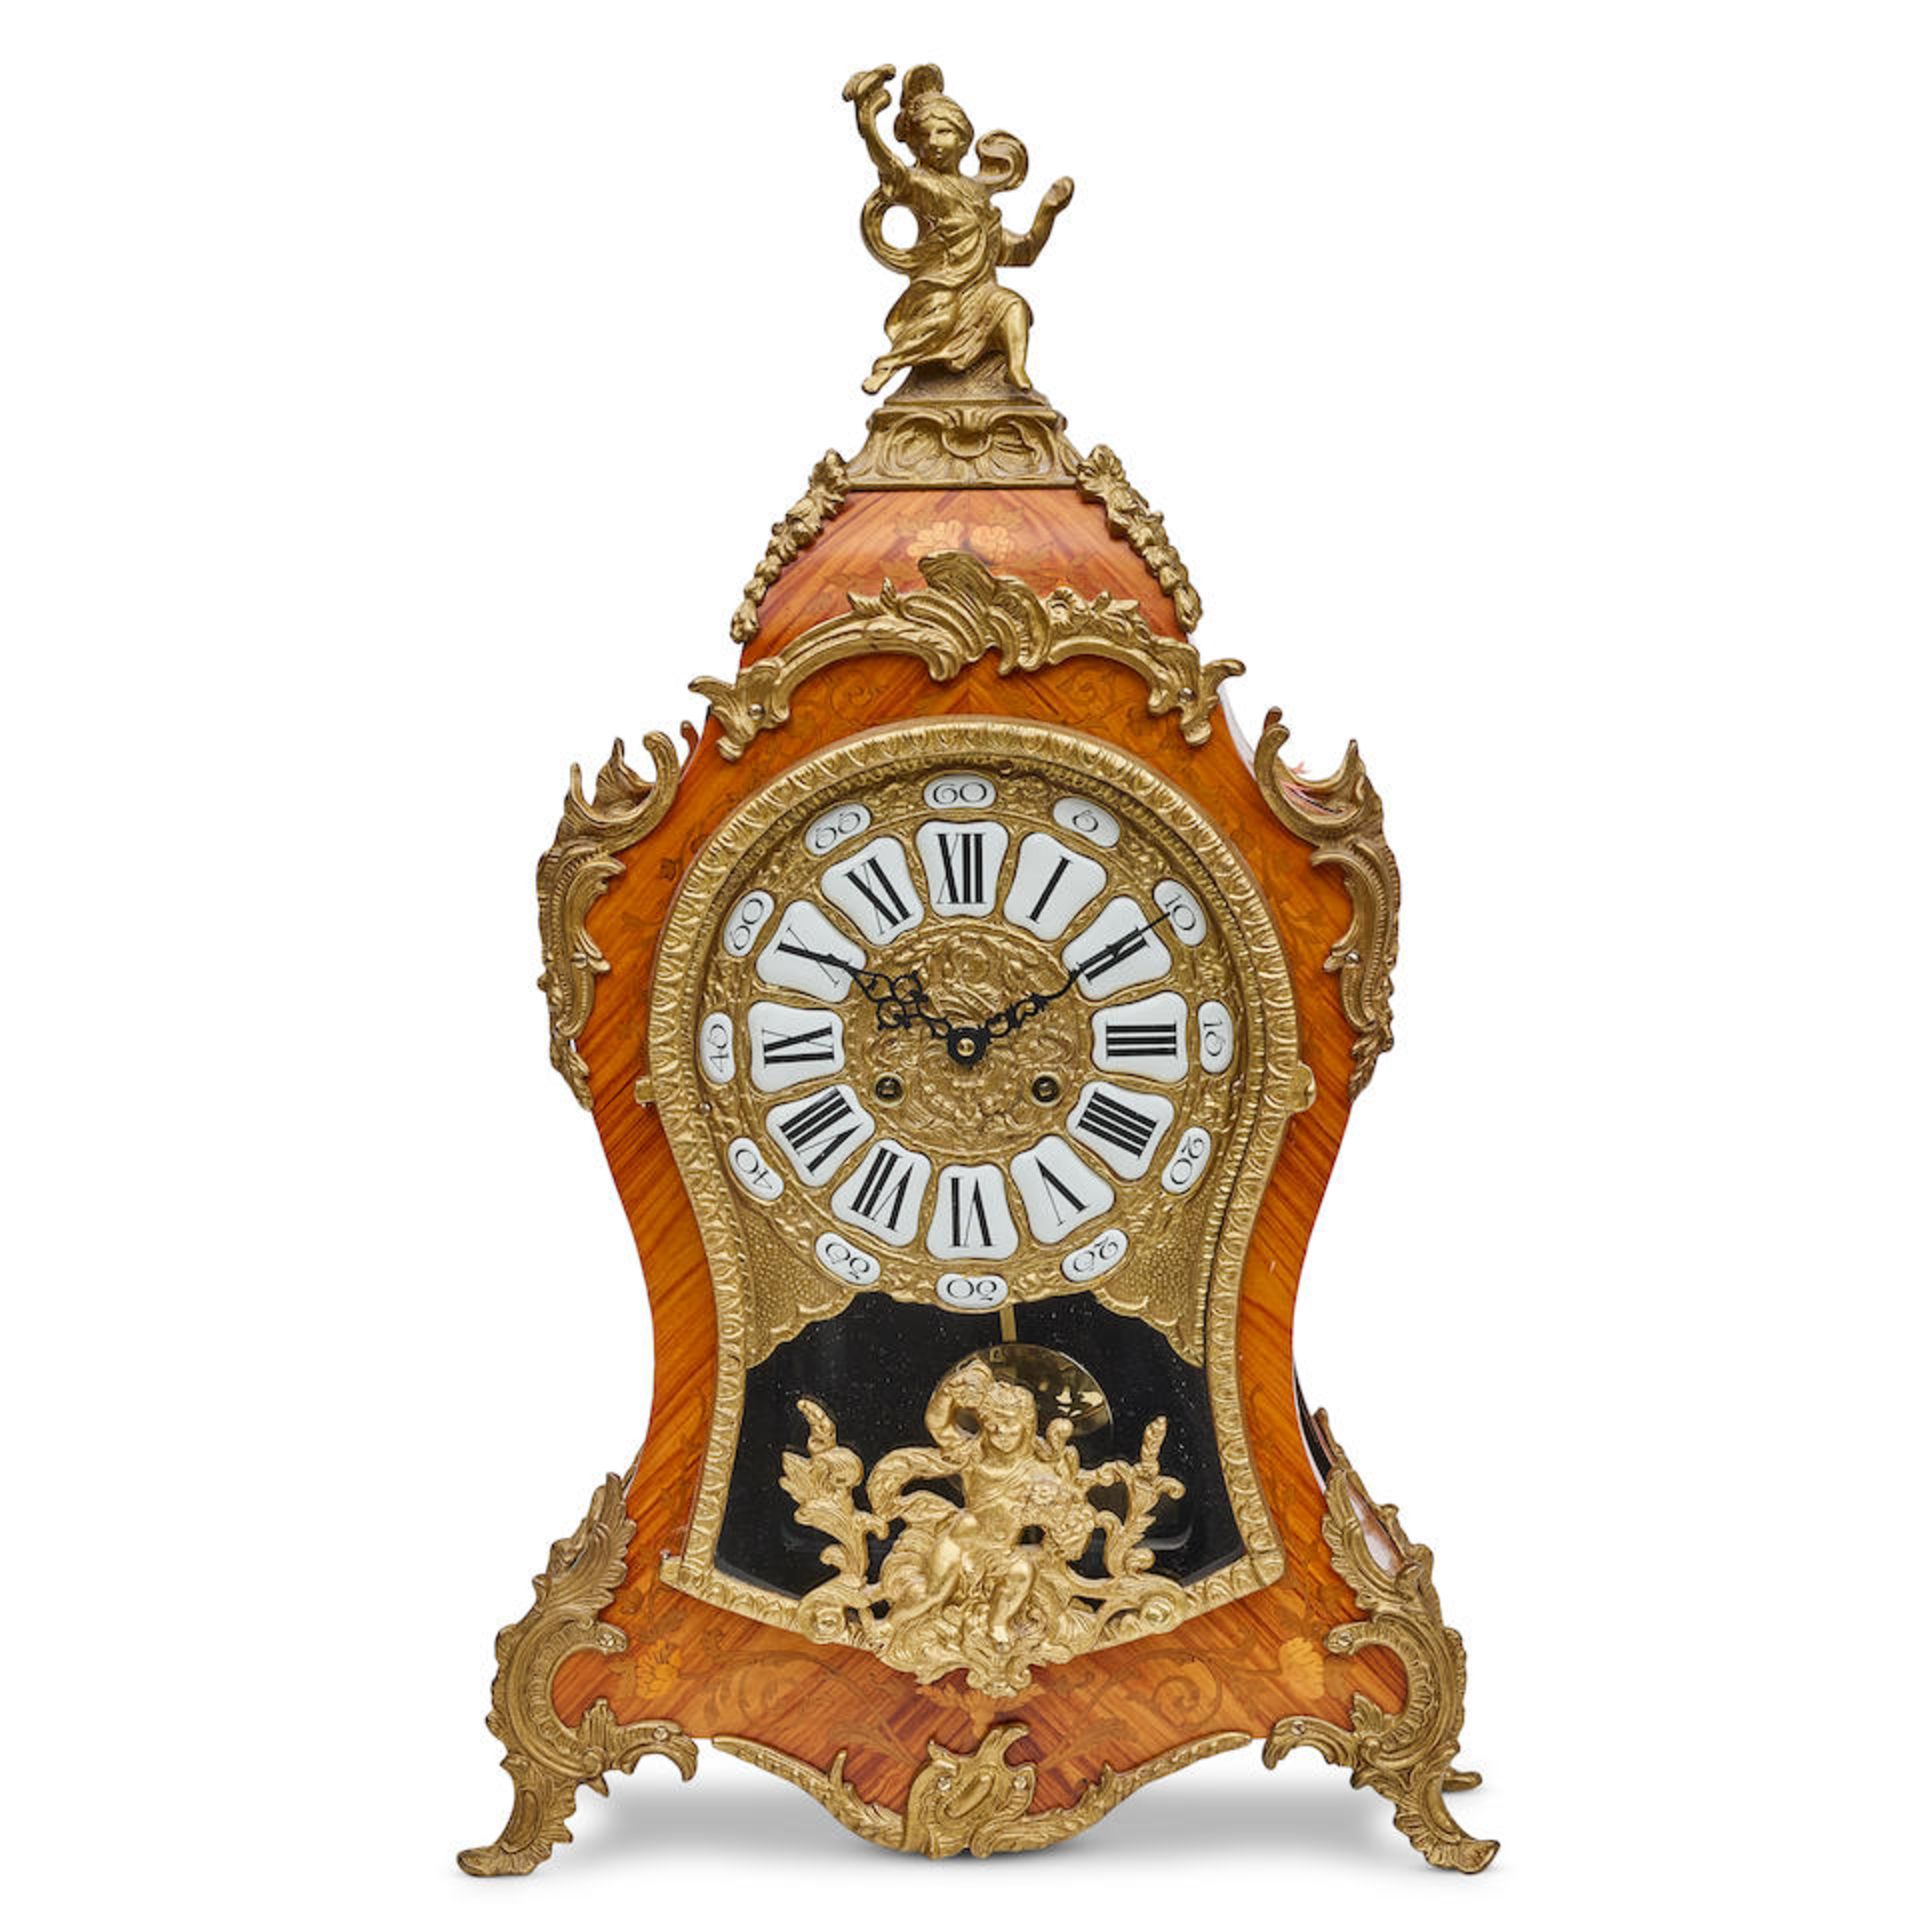 A LOUIS XV STYLE GILT BRONZE MOUNTED MARQUETRY MANTEL CLOCK